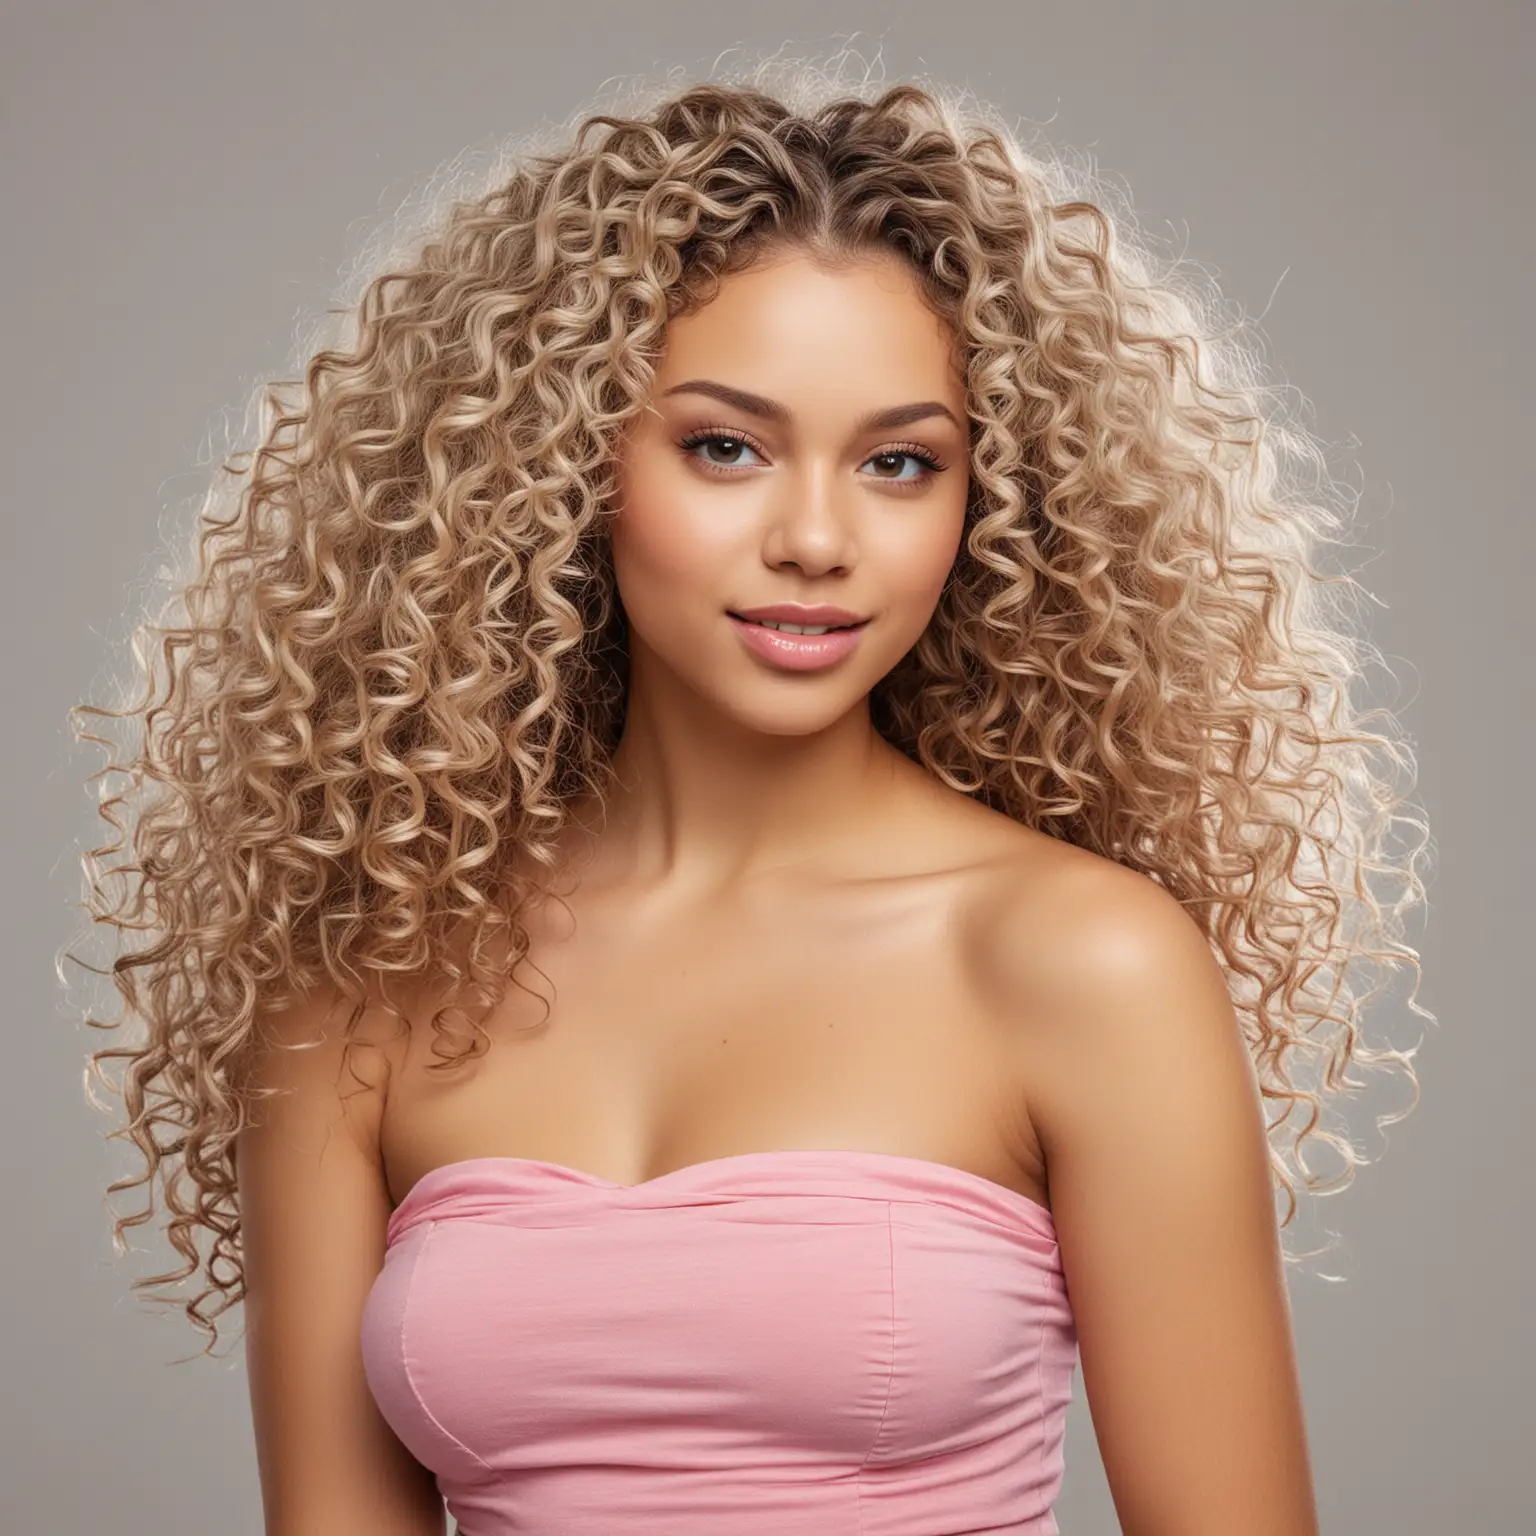 attractive light skin woman with pink strapless top and long curly hair 